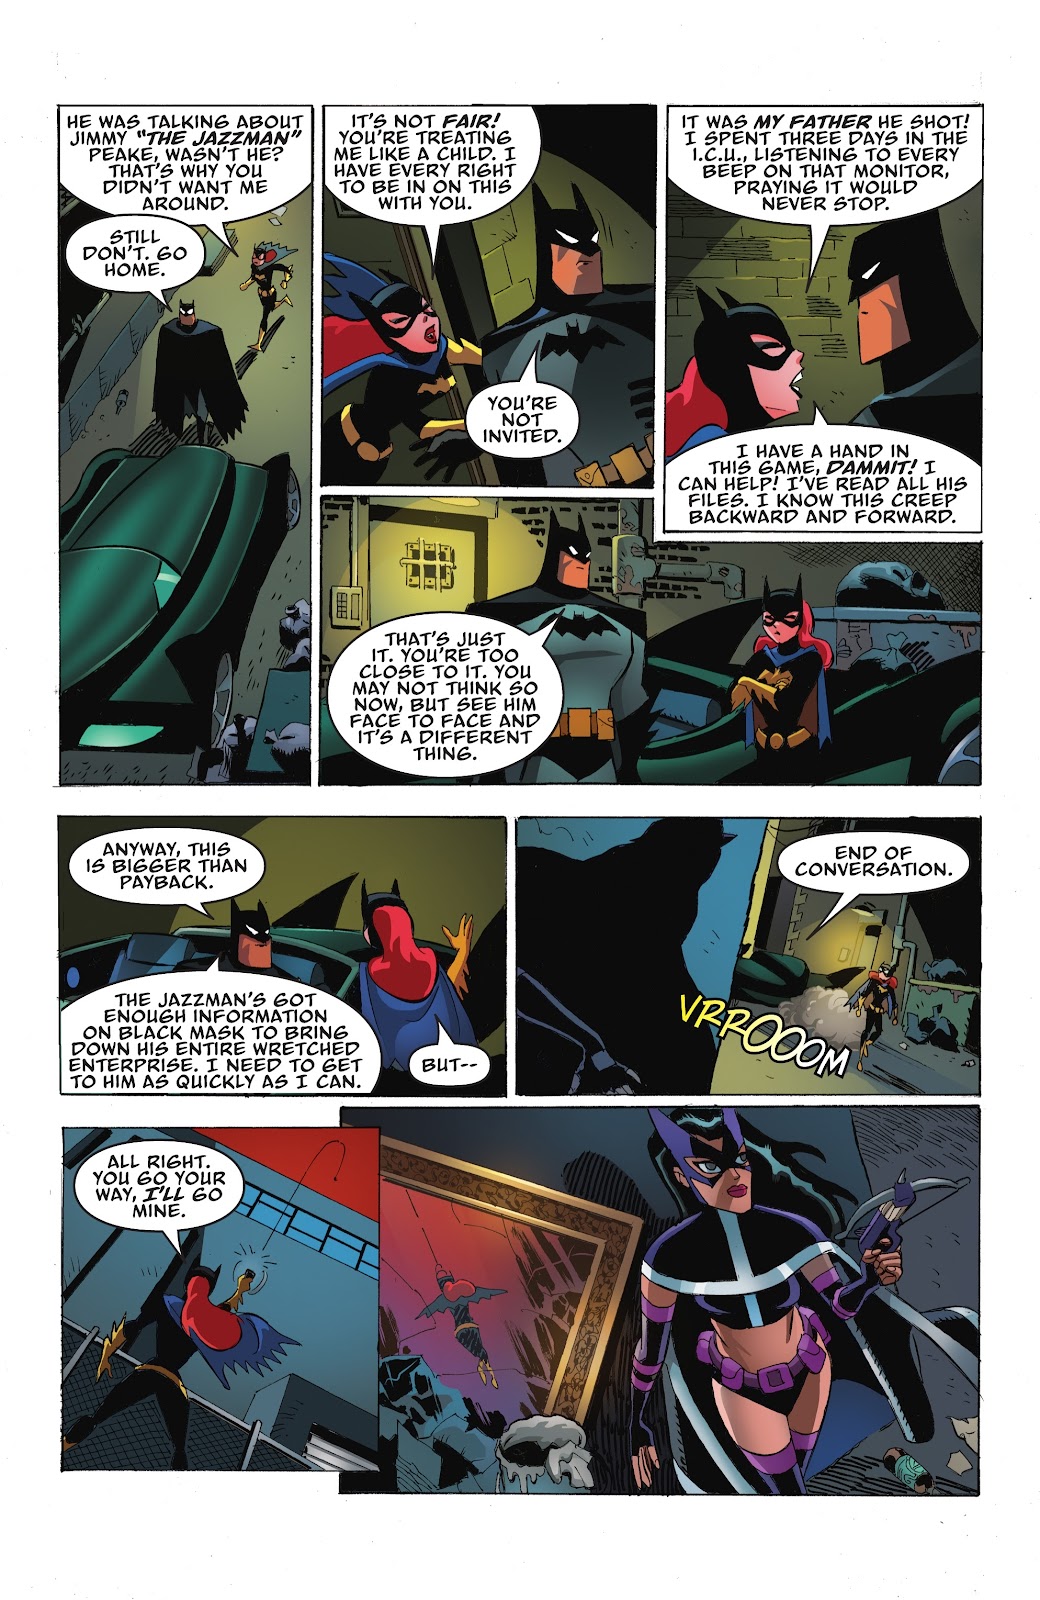 Batman: The Adventures Continue: Season Two issue 3 - Page 5